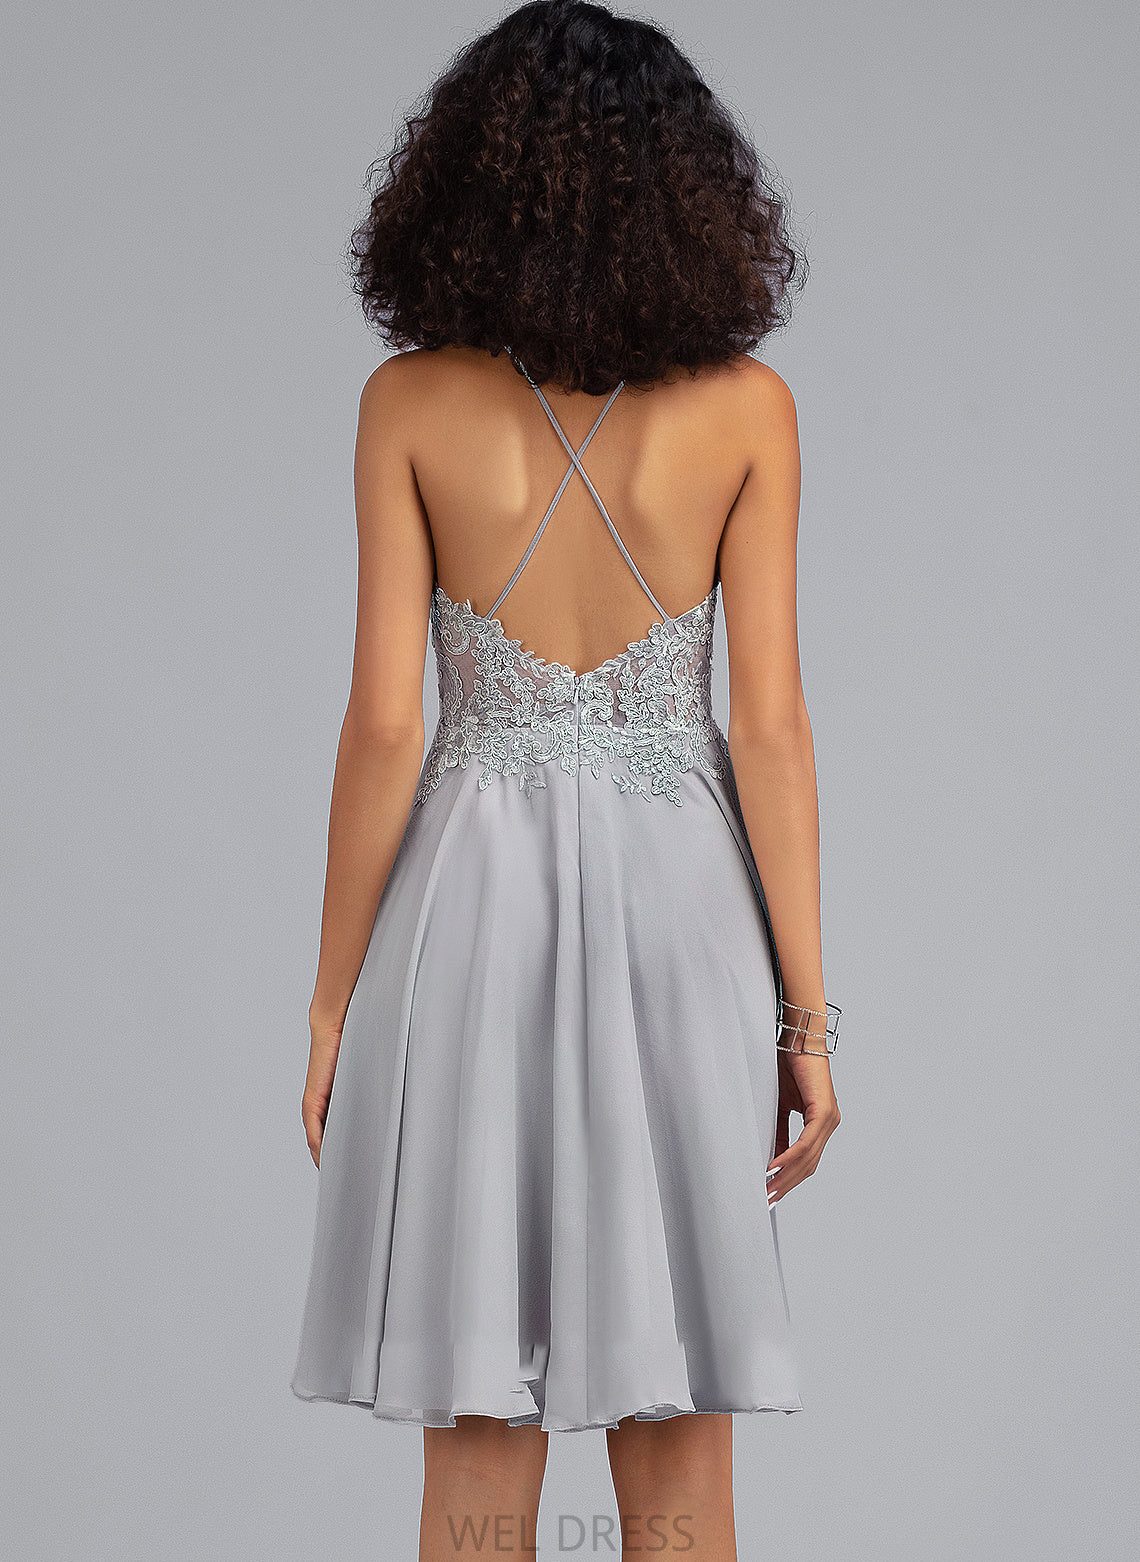 With Chiffon Sequins Knee-Length Neck Prom Dresses Moriah Scoop A-Line